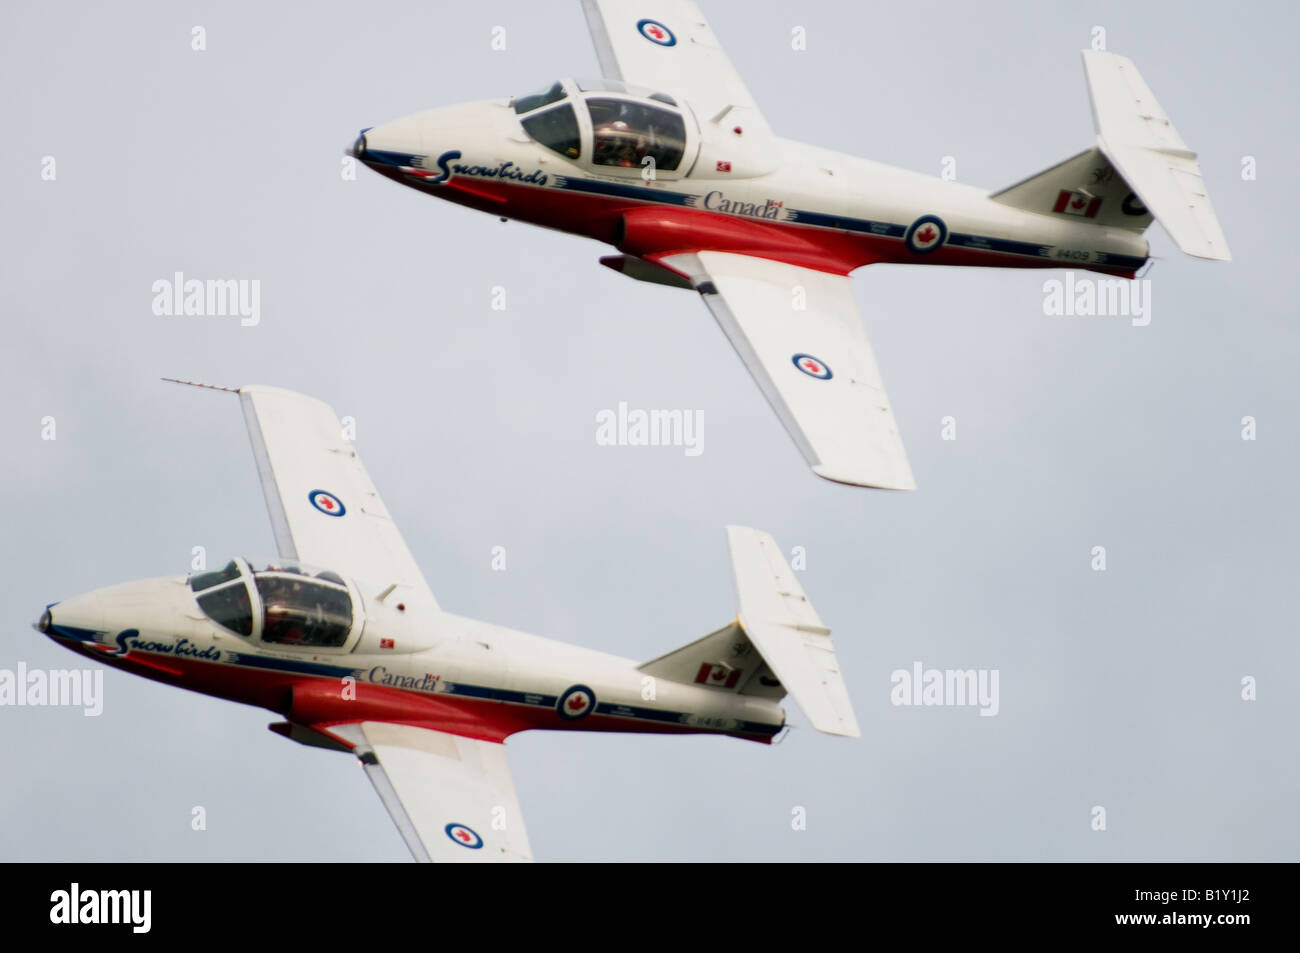 The Snowbirds, Canada's extreme aerobatic team, perform precise maneuvers together in the sky. Stock Photo